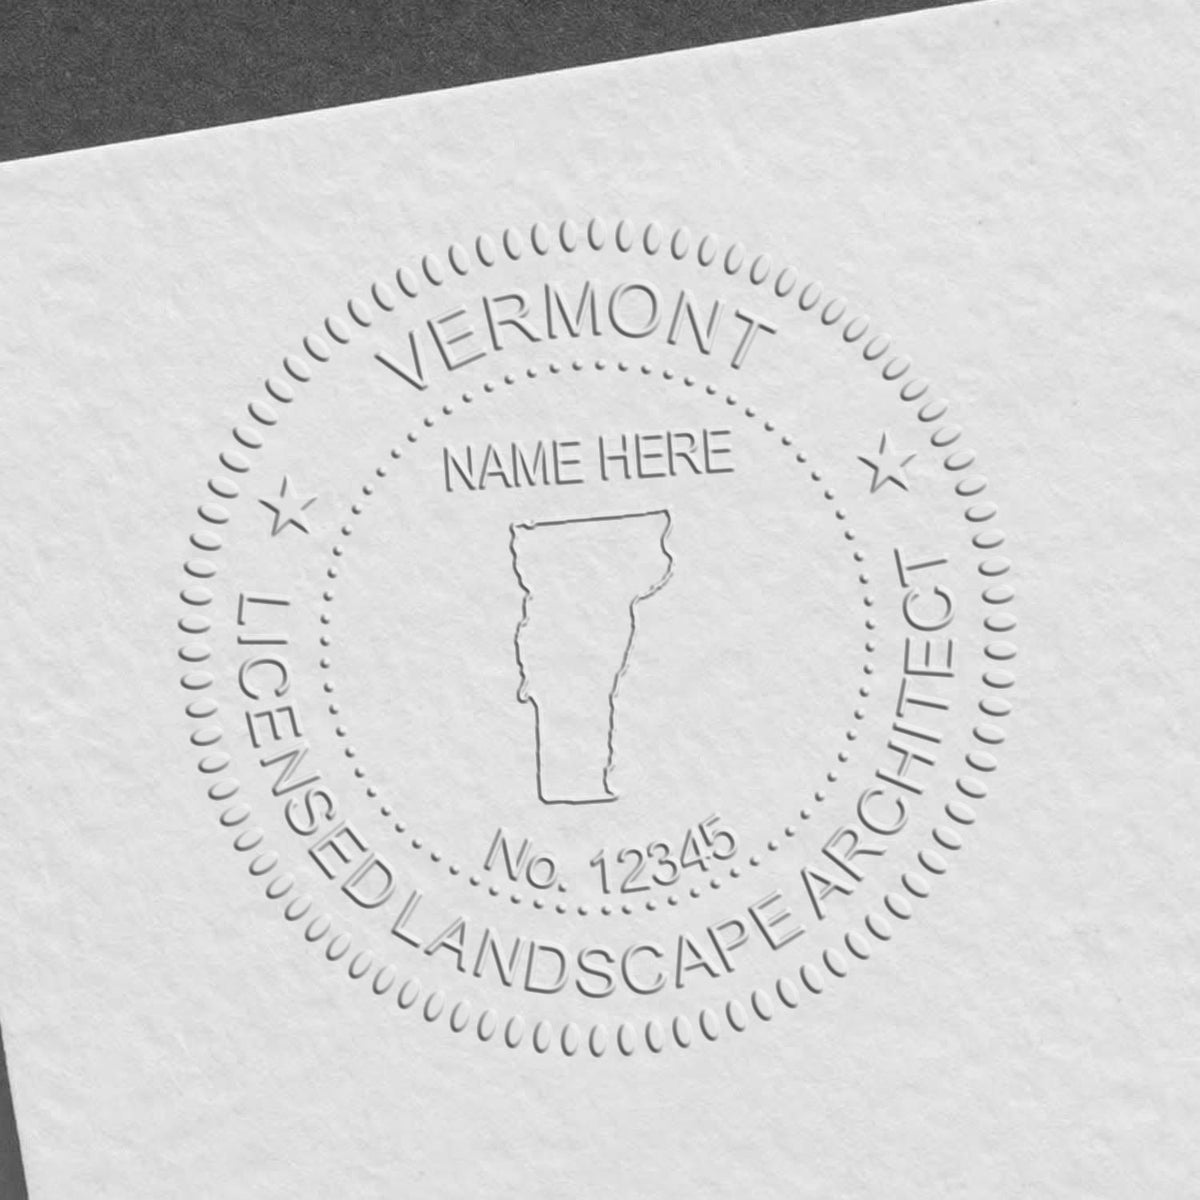 A stamped impression of the Soft Pocket Vermont Landscape Architect Embosser in this stylish lifestyle photo, setting the tone for a unique and personalized product.